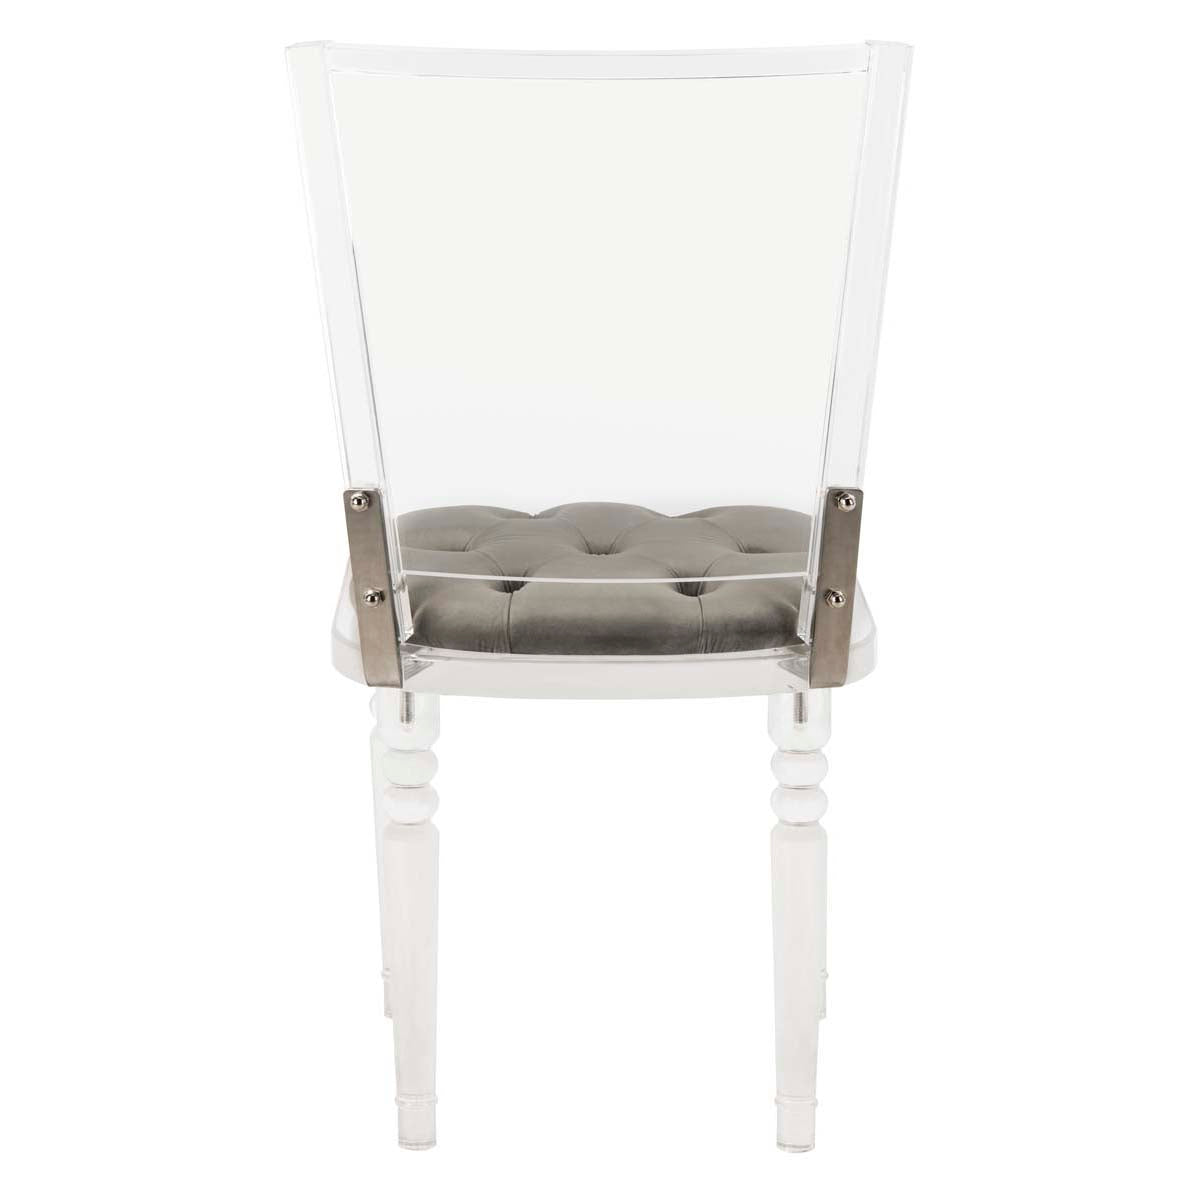 Safavieh Couture Ella Acrylic Dining Chair